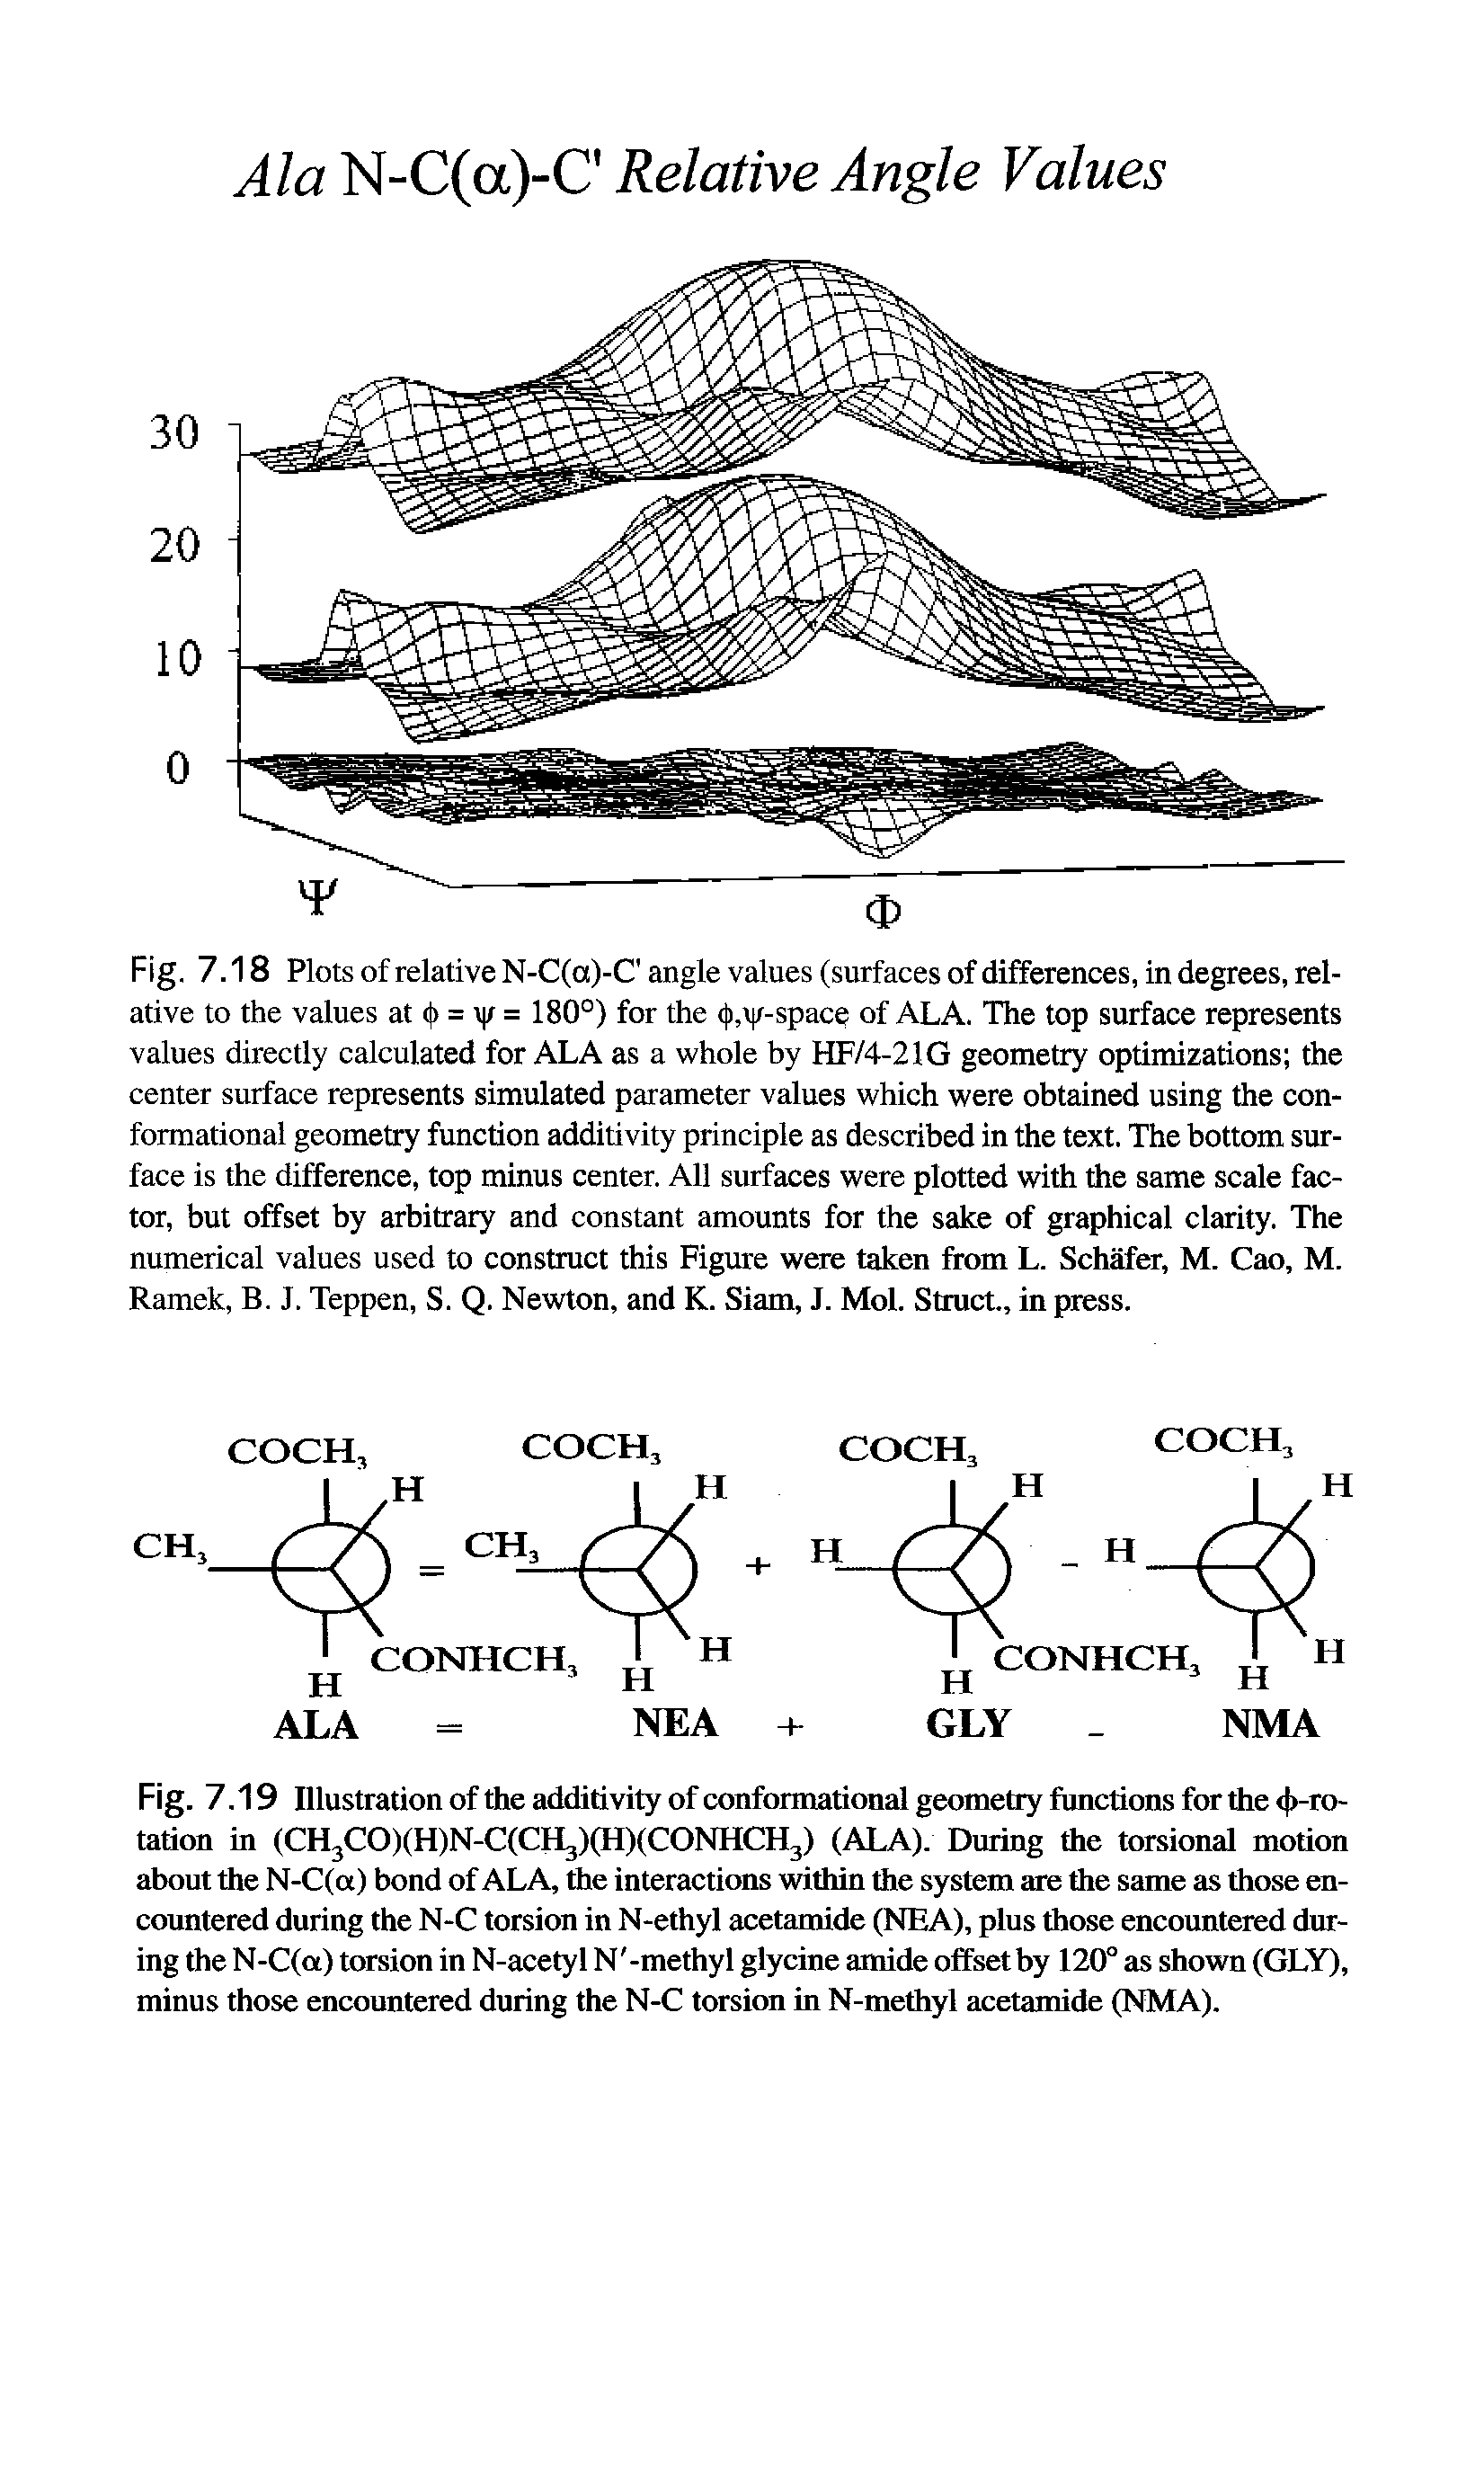 Fig. 7.19 Illustration of the additivity of conformational geometry functions for the <J>-ro-tation in (CH3CO)(H)N-C(CH3)(H)(CONHCH3) (ALA). During the torsional motion about the N-C(a) bond of ALA, the interactions within the system are the same as those encountered during the N-C torsion in N-ethyl acetamide (NEA), plus those encountered during the N-C(a) torsion in N-acetyl N -methyl glycine amide offset by 120° as shown (GLY), minus those encountered during the N-C torsion in N-methyl acetamide (NMA).